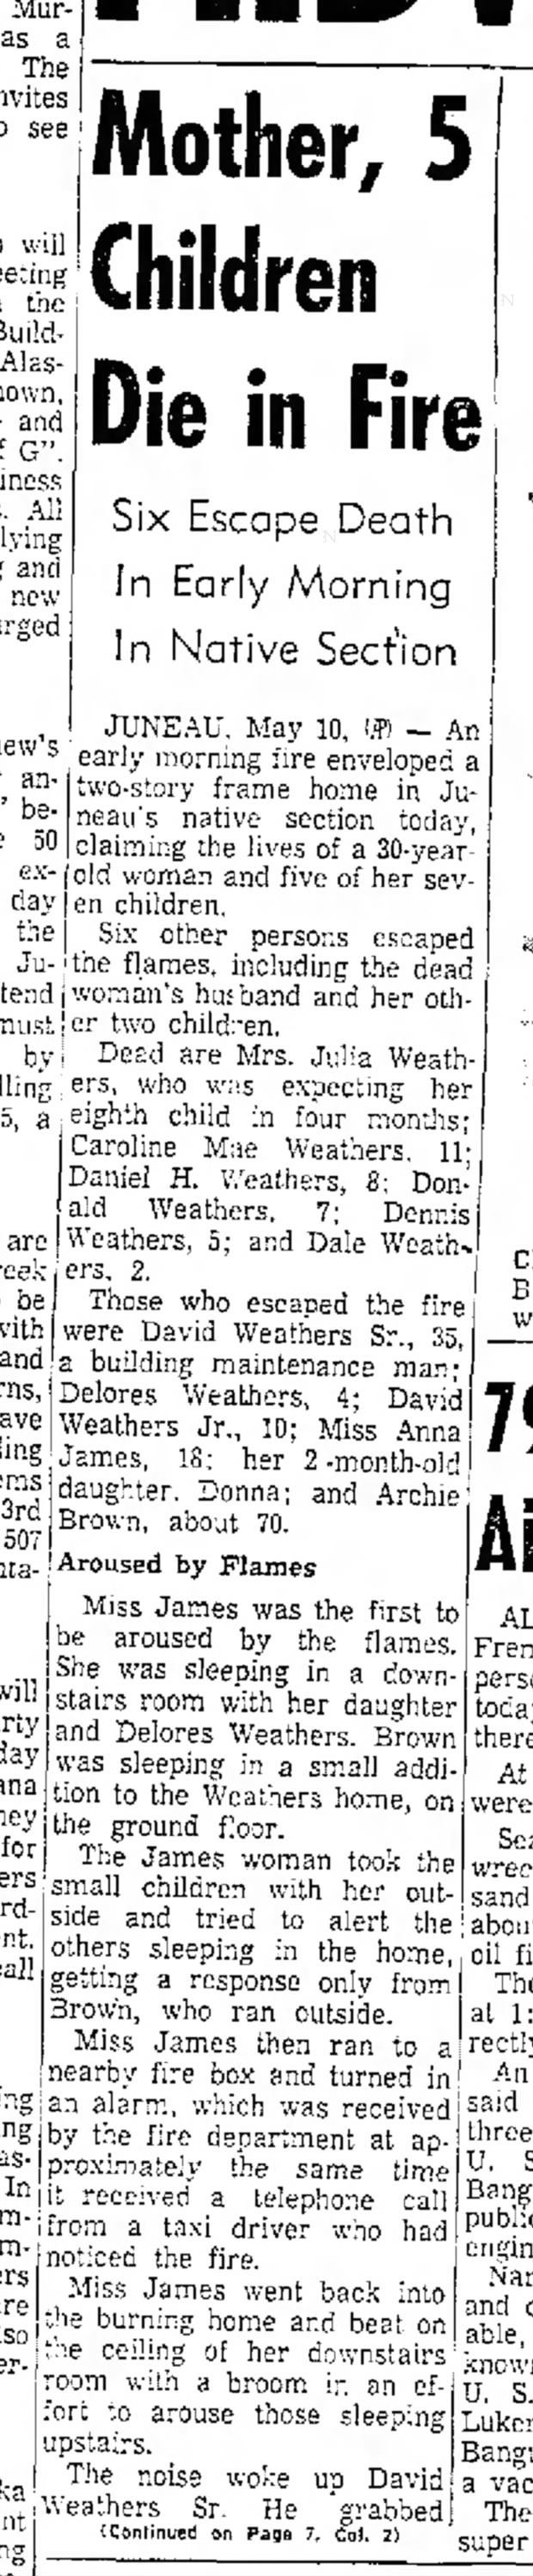 Weathers James fire 5.10.61